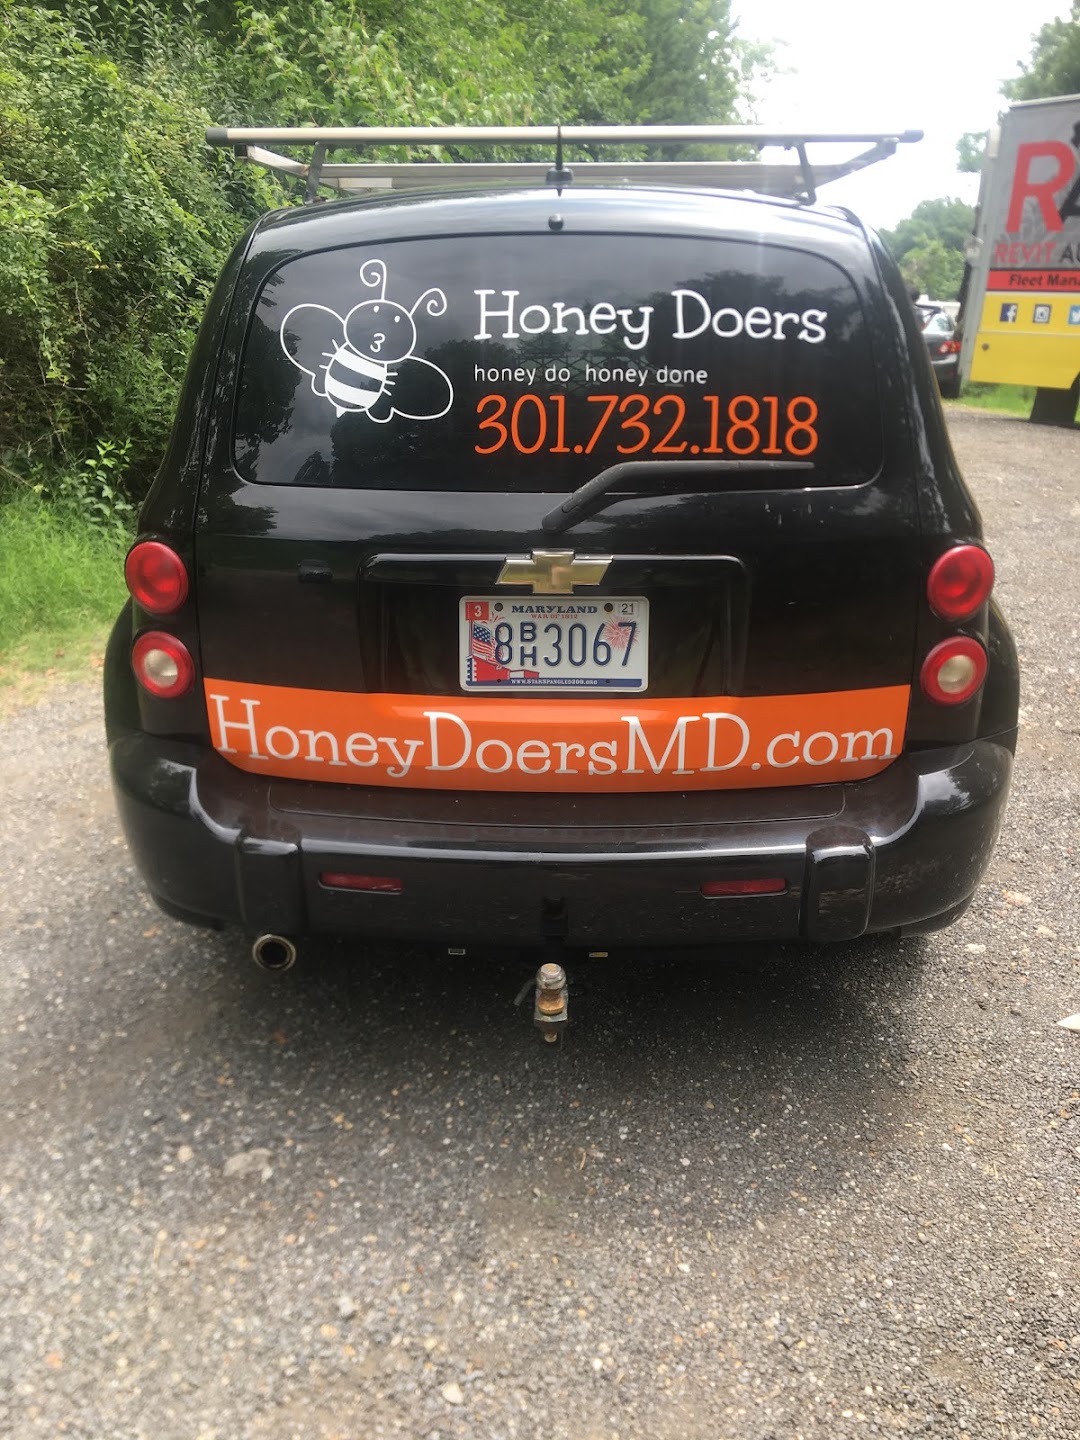 Honey Doers Laundry & Grocery Delivery